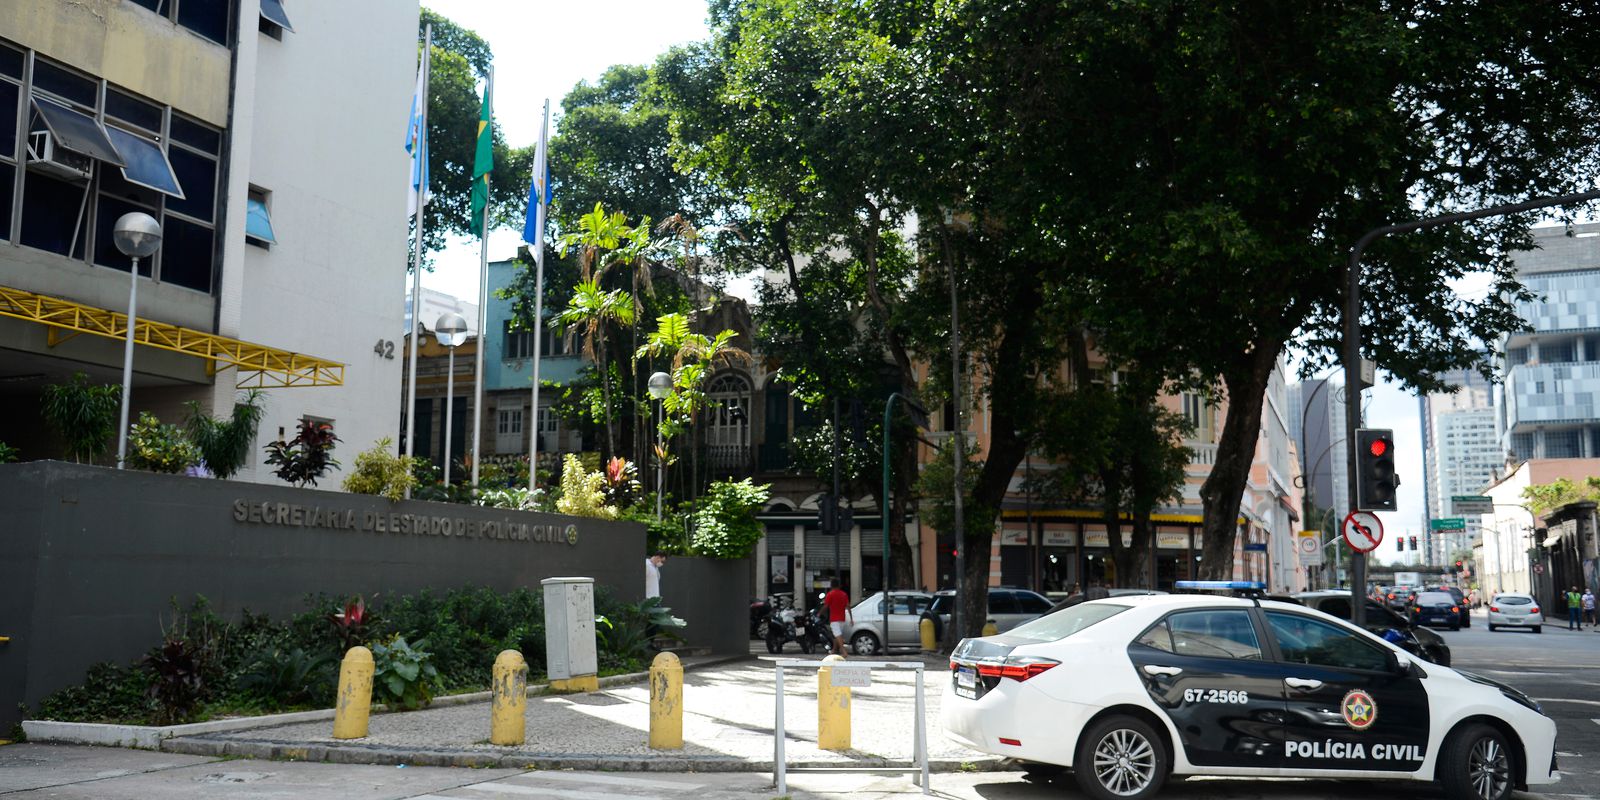 Former Secretary of Civil Police of Rio is accused of obstructing justice